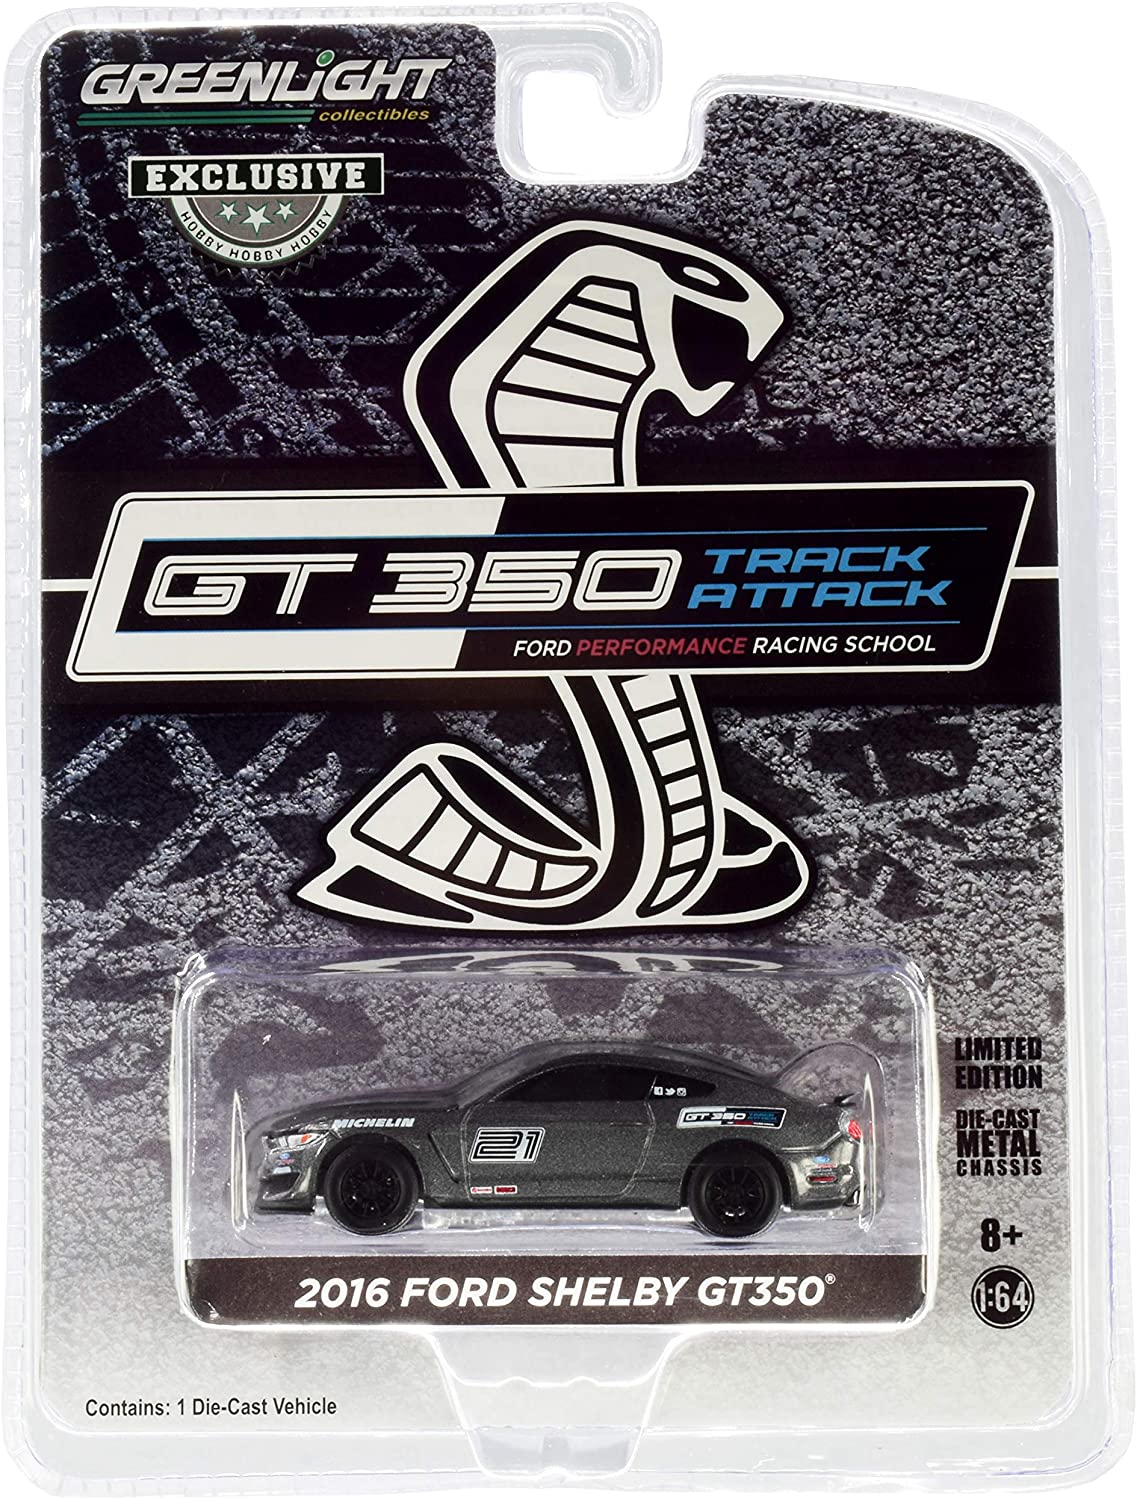 GreenLight 1:64 2016 Ford Mustang Shelby GT350 - Ford Performance Racing School GT350 Track Attack #21 - Magnetic 30192